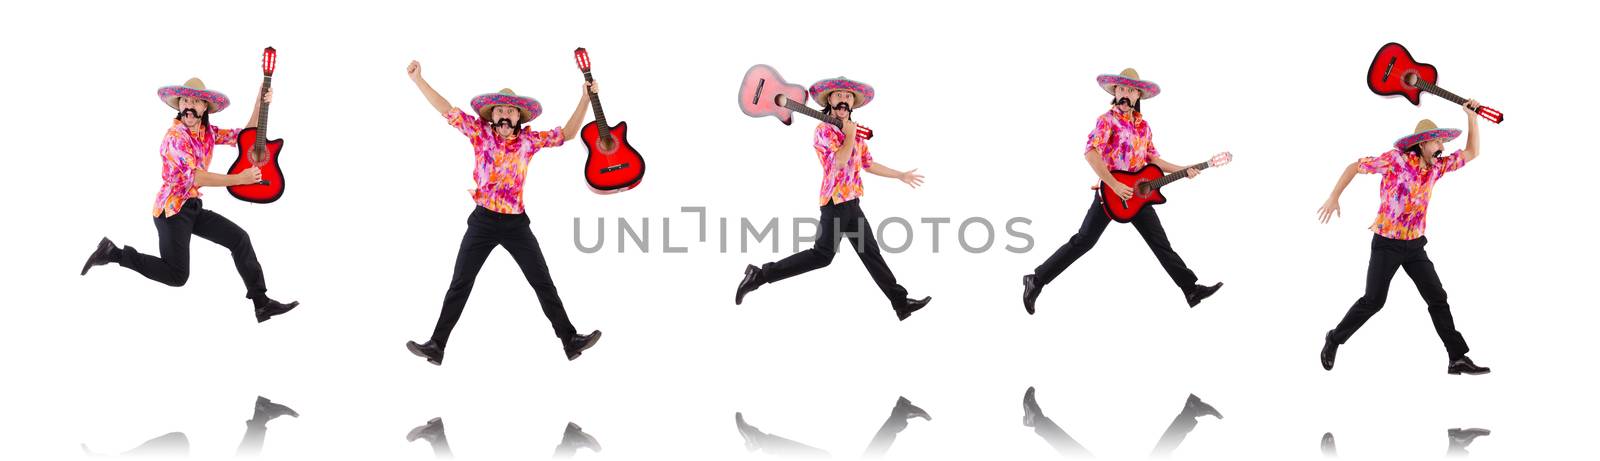 Mexican male brandishing guitar isolated on white